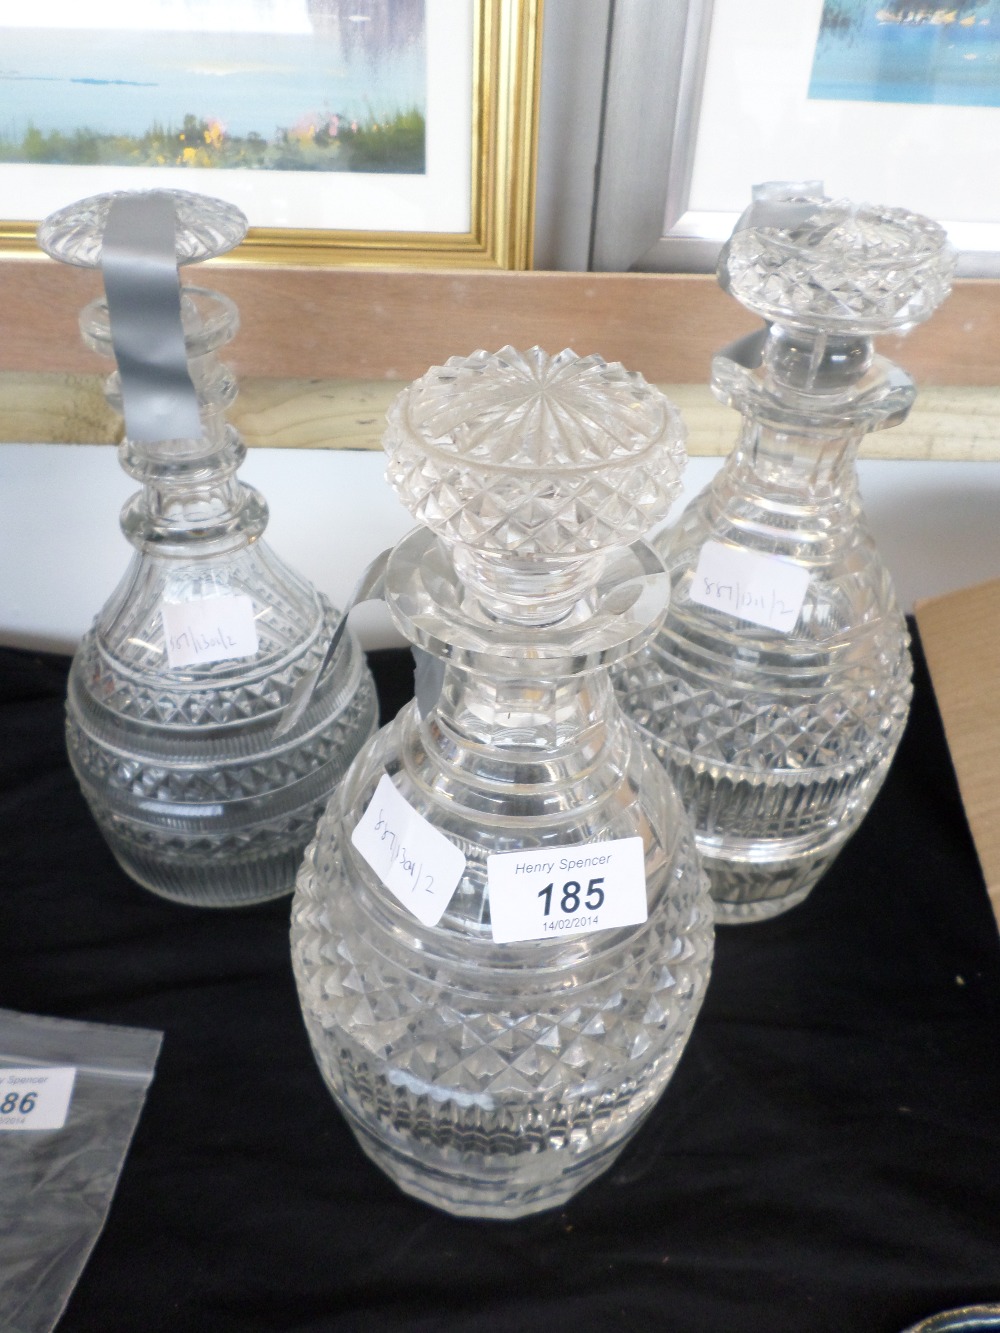 Cut glass decanters (3) dating from the late 19th century